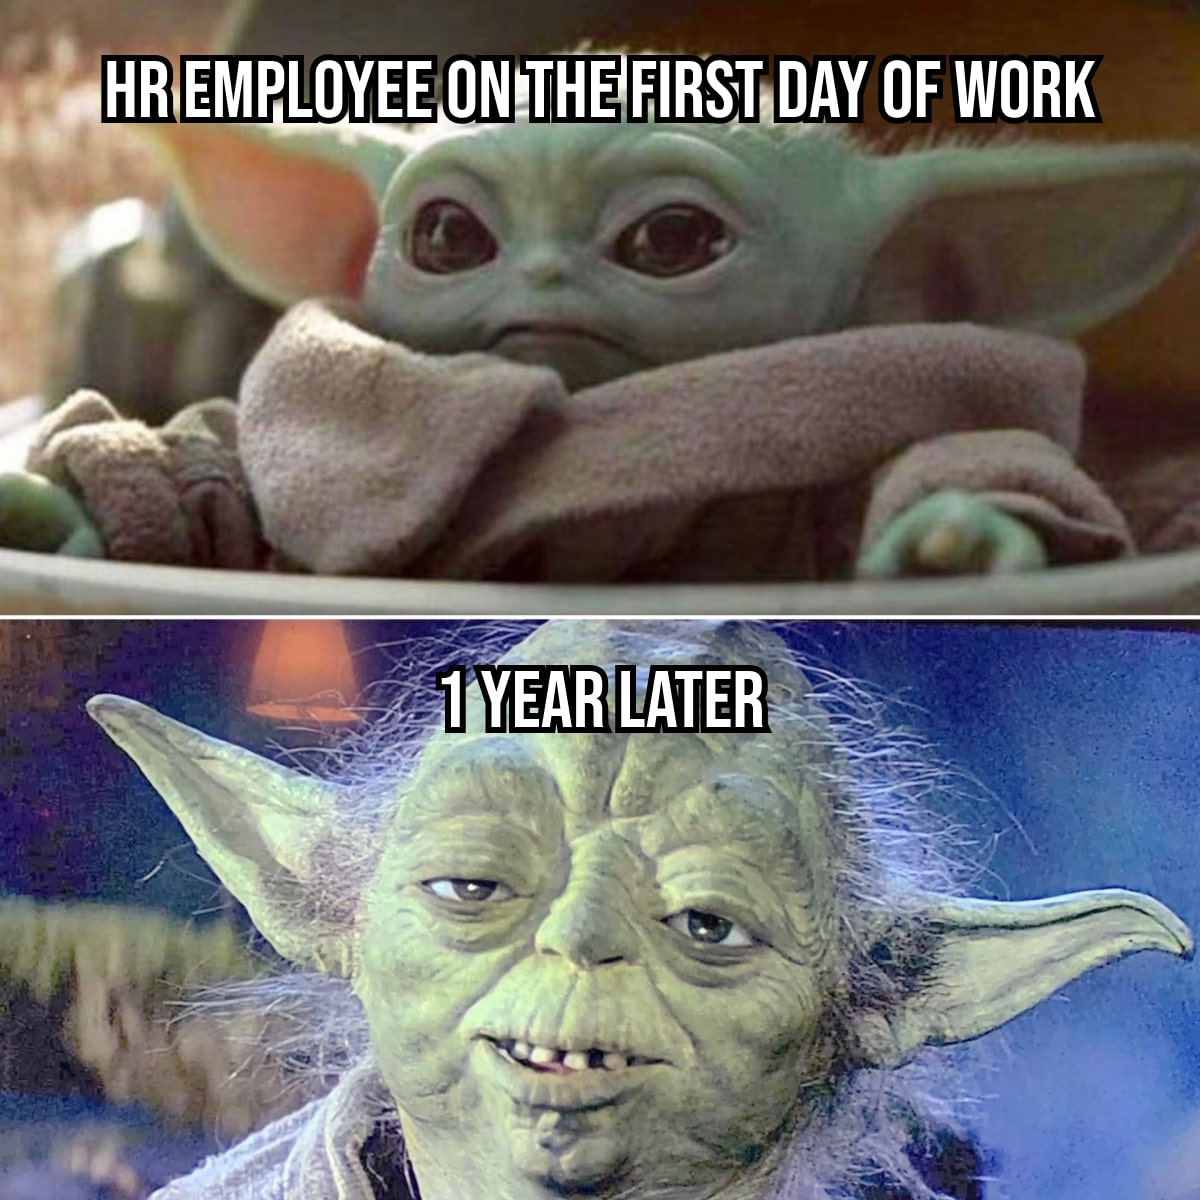 hr employee on their first day of work-min